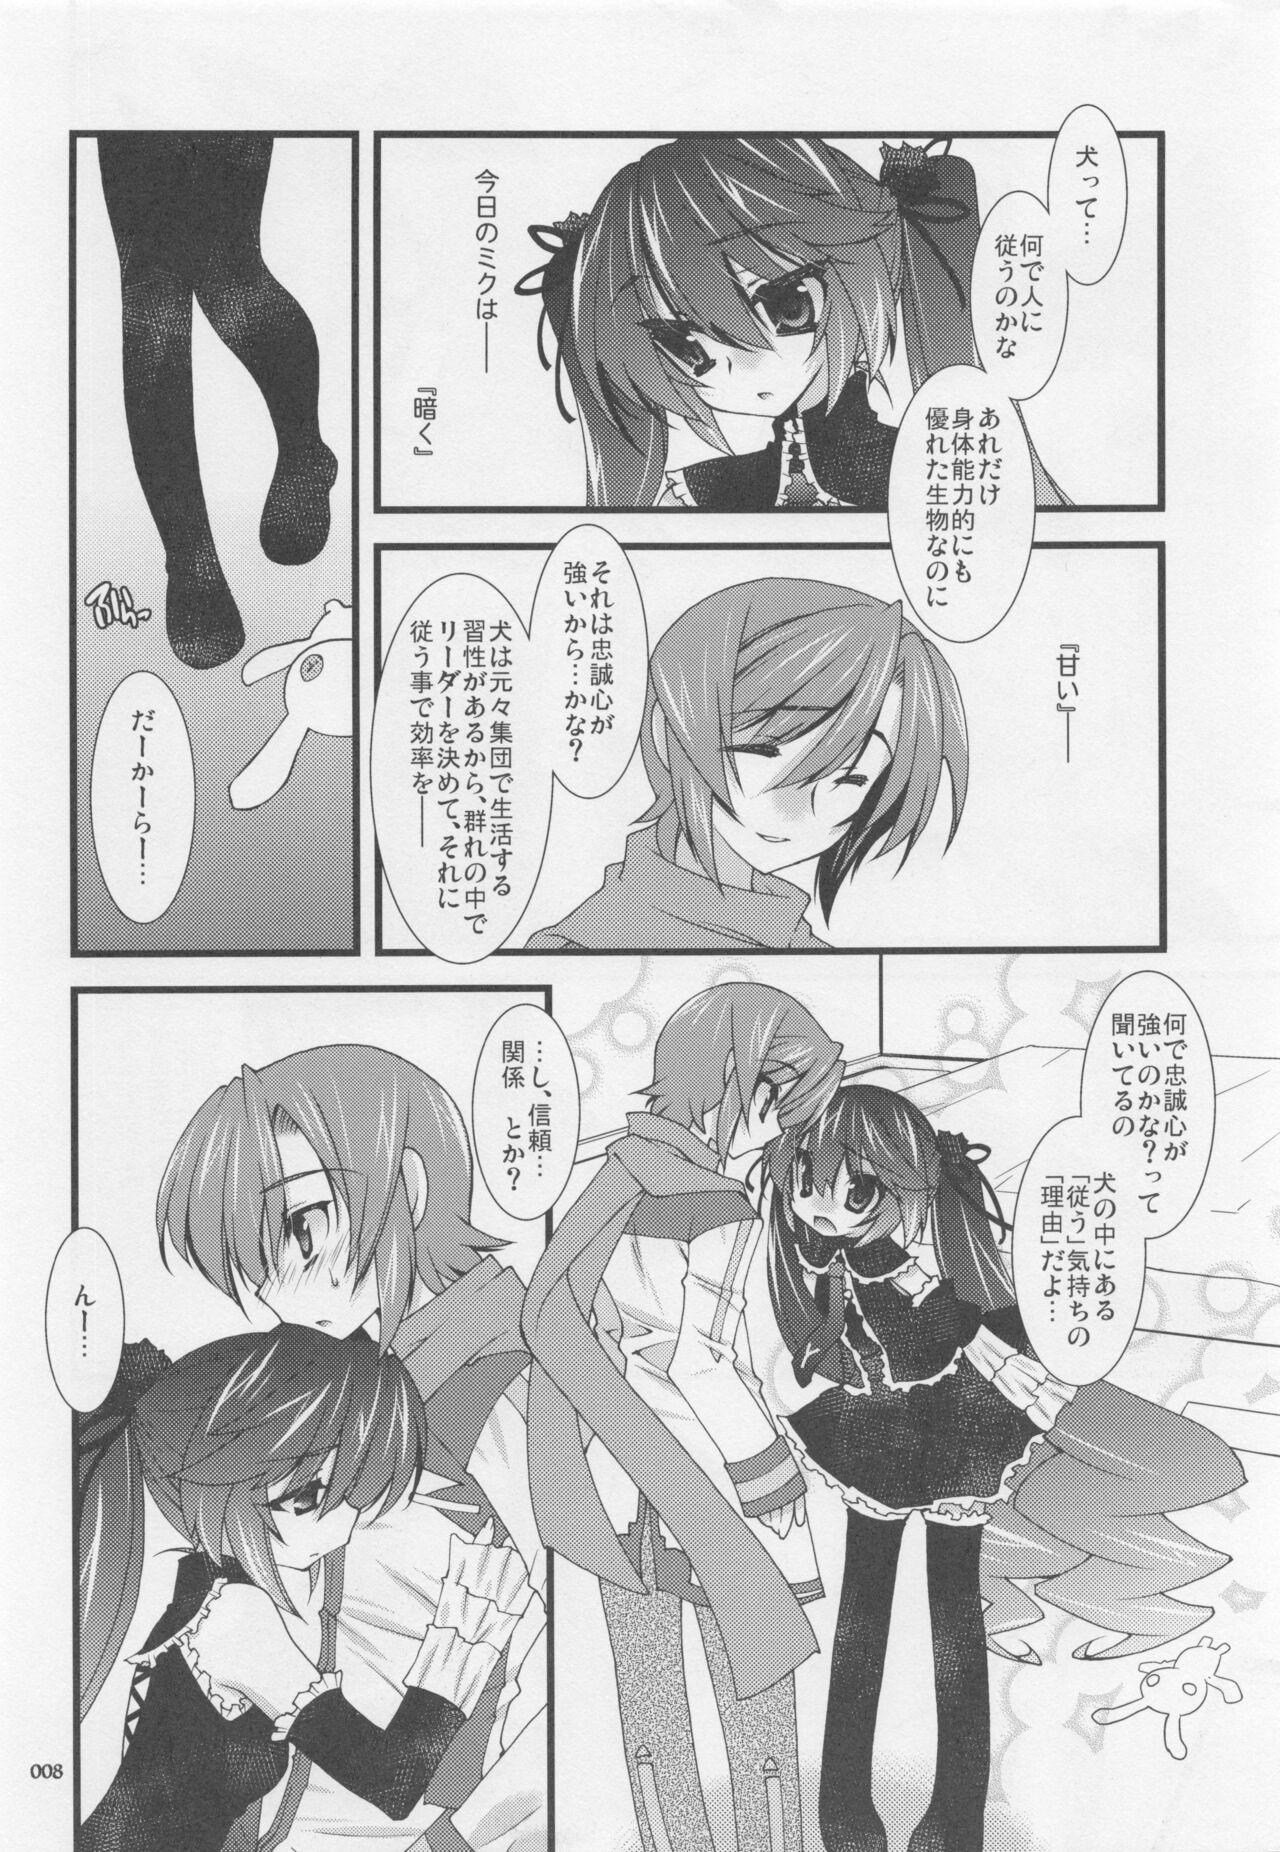 Phat infinito strega - Vocaloid Hot Brunette - Page 7